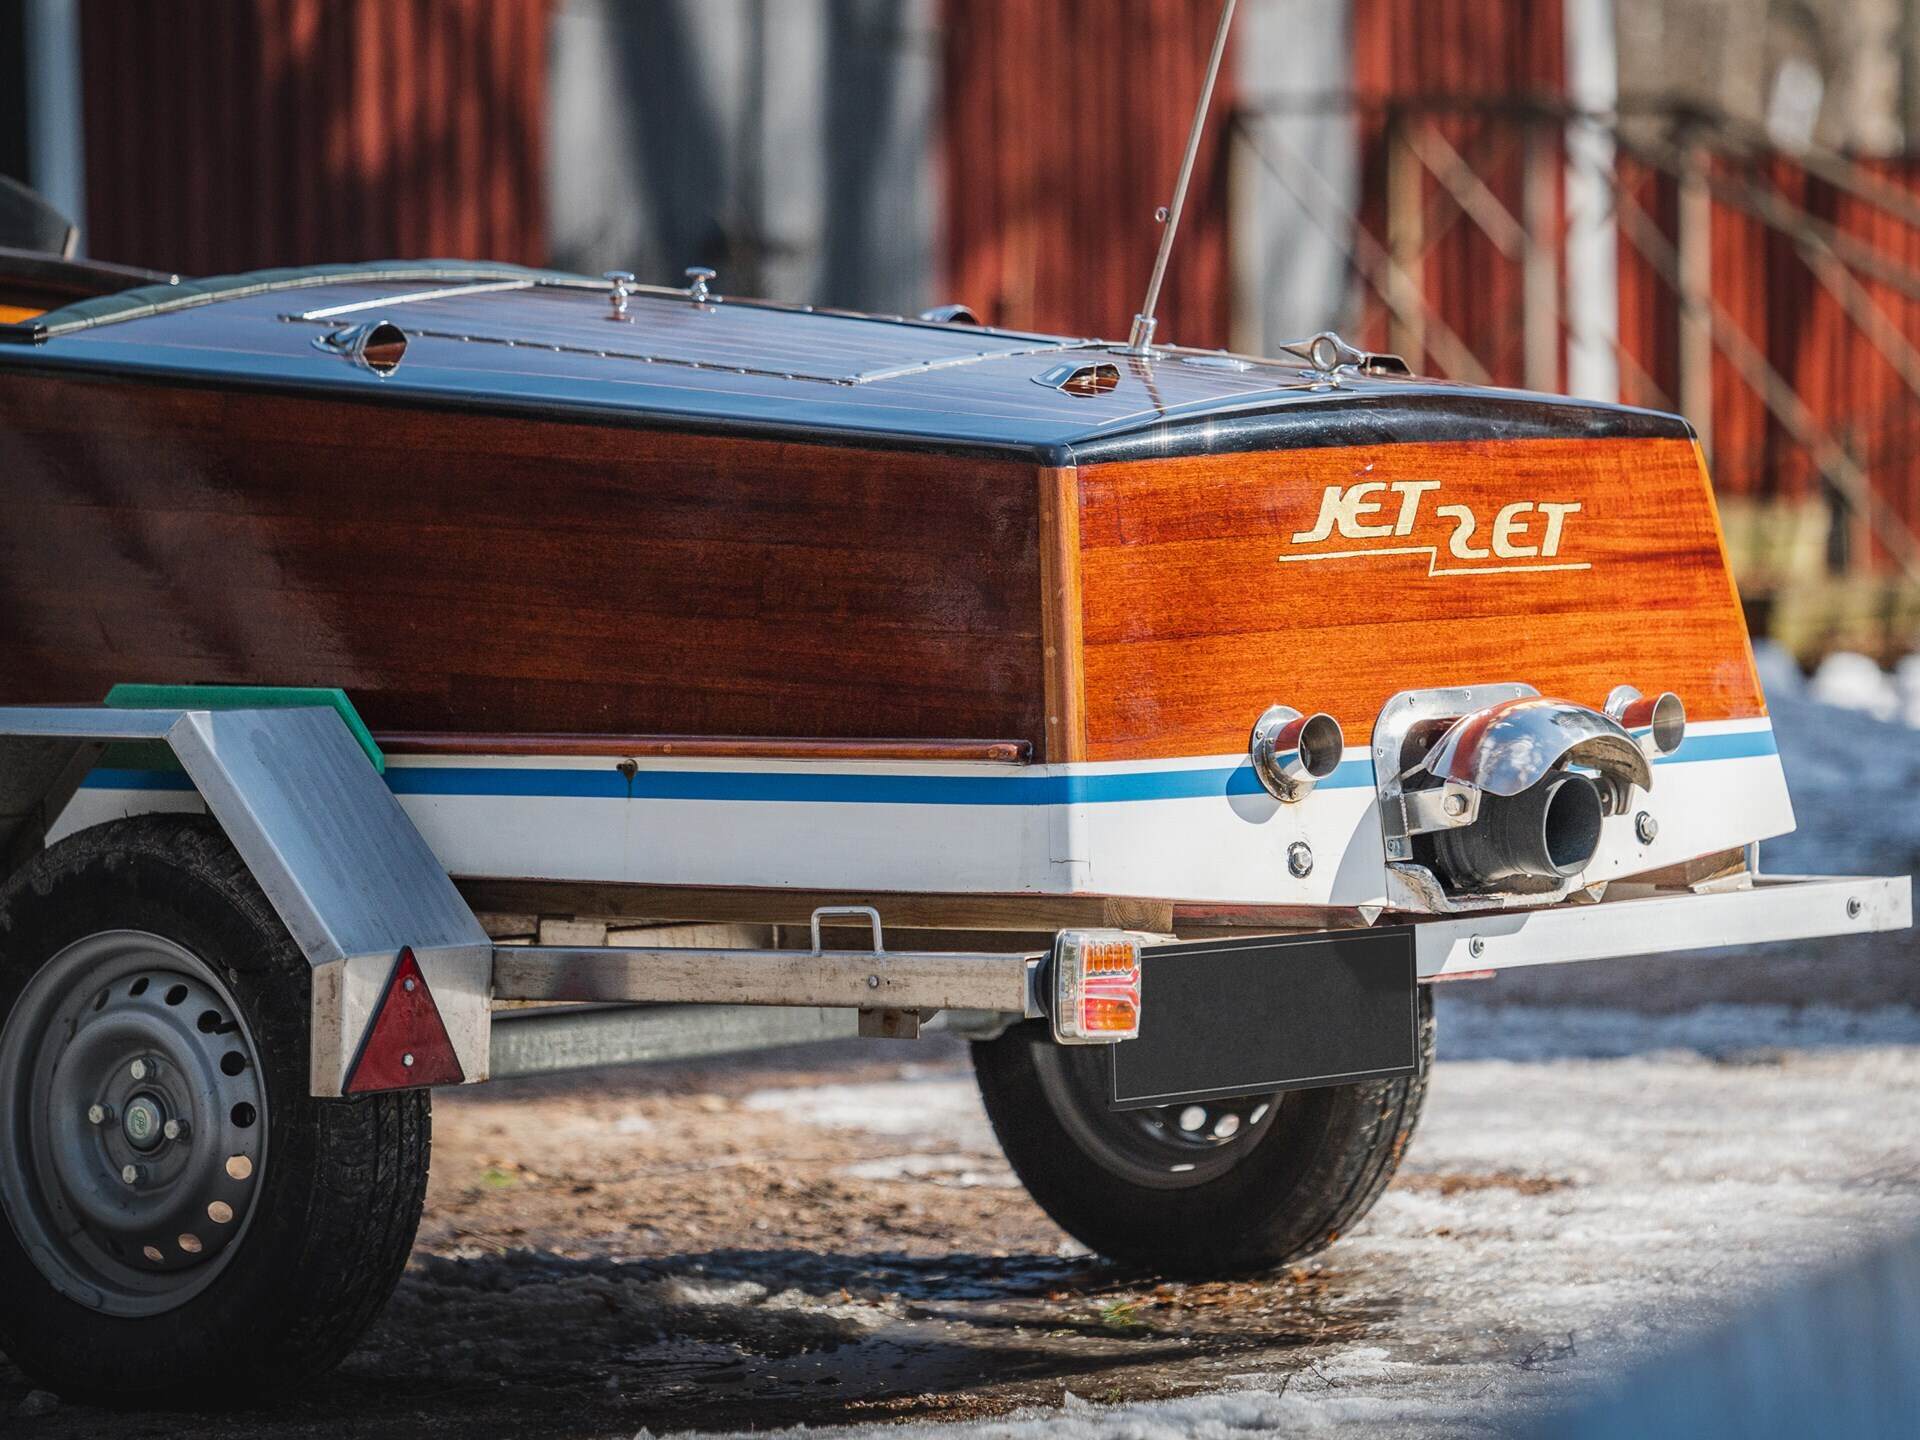 This home-built, elegant-looking boat is a real little poison bag 6